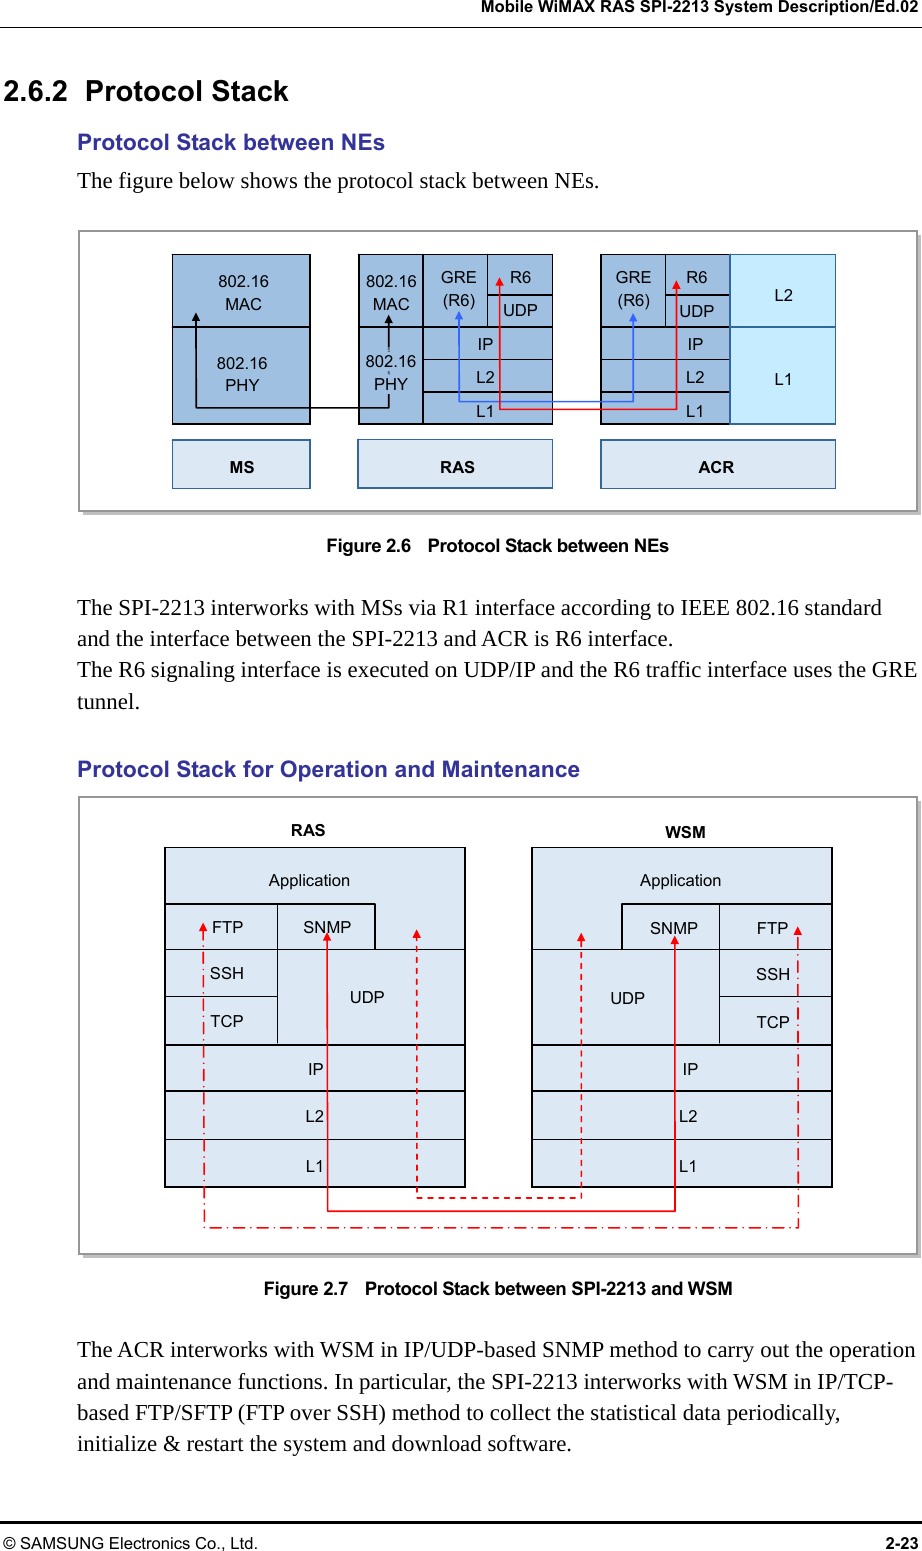   Mobile WiMAX RAS SPI-2213 System Description/Ed.02 © SAMSUNG Electronics Co., Ltd.  2-23 2.6.2 Protocol Stack Protocol Stack between NEs The figure below shows the protocol stack between NEs.  Figure 2.6    Protocol Stack between NEs  The SPI-2213 interworks with MSs via R1 interface according to IEEE 802.16 standard and the interface between the SPI-2213 and ACR is R6 interface. The R6 signaling interface is executed on UDP/IP and the R6 traffic interface uses the GRE tunnel.  Protocol Stack for Operation and Maintenance Figure 2.7    Protocol Stack between SPI-2213 and WSM  The ACR interworks with WSM in IP/UDP-based SNMP method to carry out the operation and maintenance functions. In particular, the SPI-2213 interworks with WSM in IP/TCP-based FTP/SFTP (FTP over SSH) method to collect the statistical data periodically, initialize &amp; restart the system and download software. WSM RAS IPApplicationFTP TCP SSHFTP TCP SSHL2 IP Application SNMPUDP UDPSNMPL1 L2 L1 16PHY802.16  MAC 802.16  PHY 802.16 MAC GRE(R6)R6UDPIPL2L1MS RAS ACR GRE(R6)R6 UDP L2 L1 IP L2 L1 802.16 PHY 